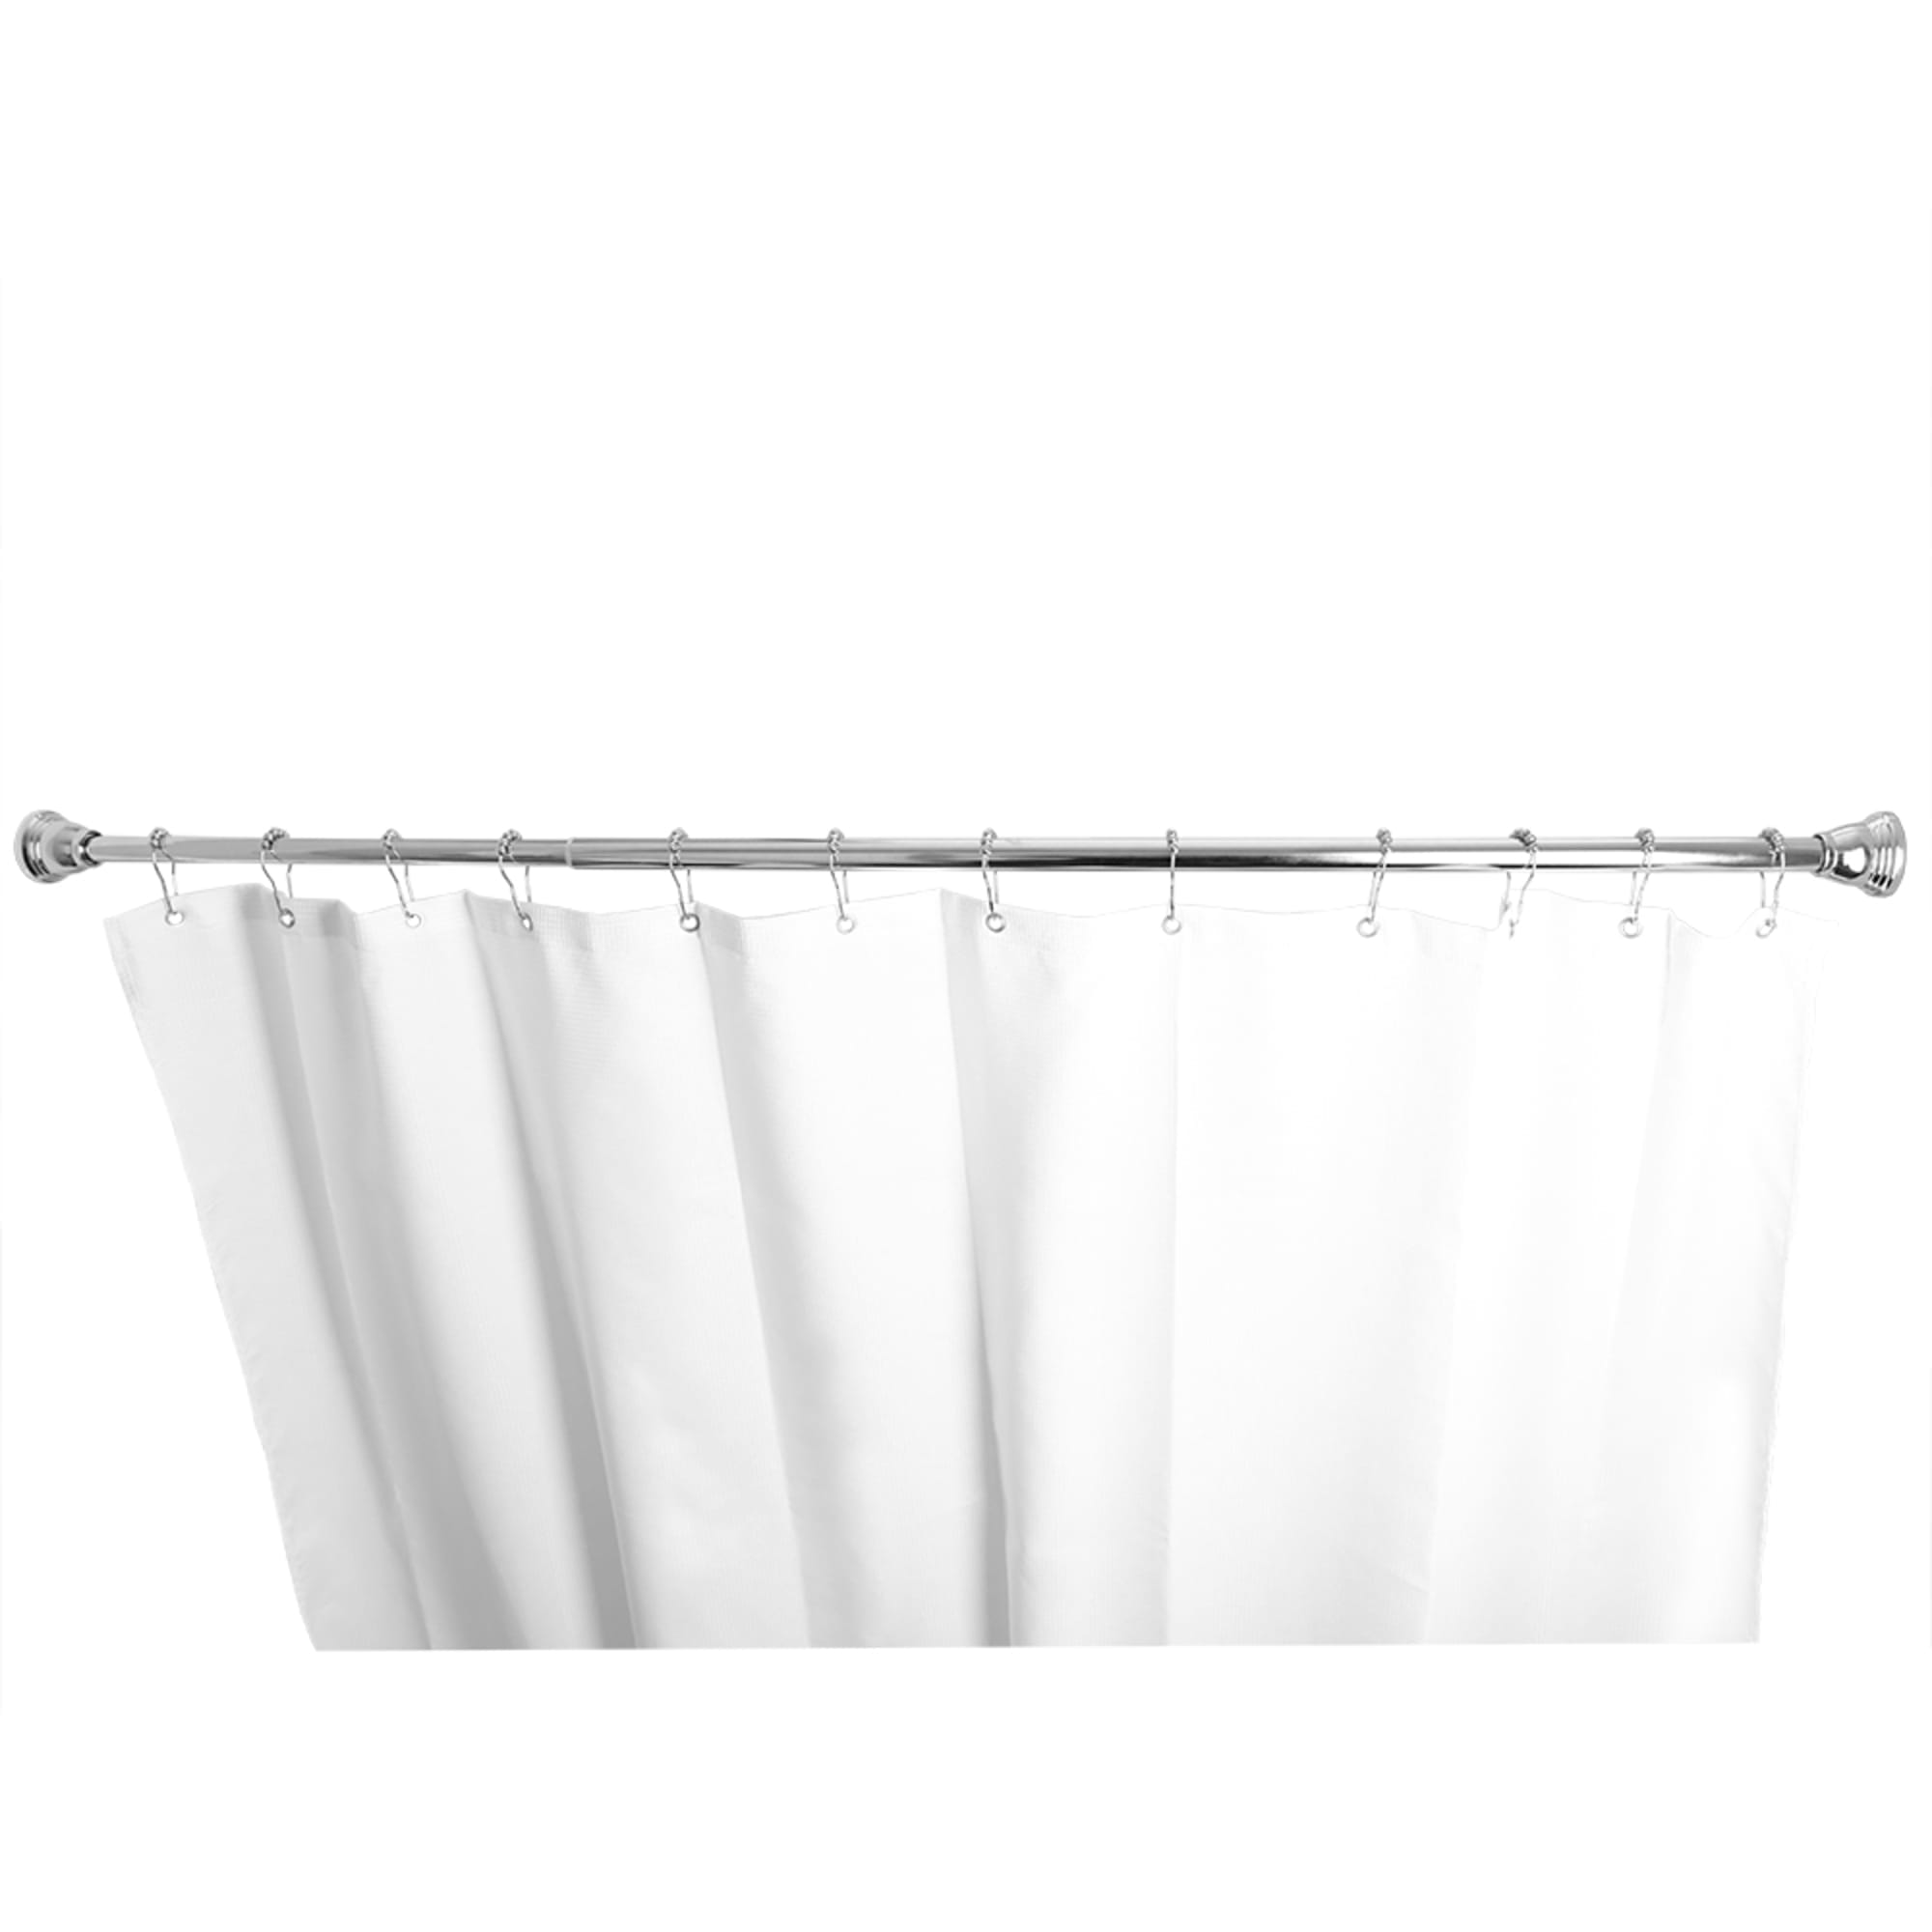 Home Basics Empire 47-72” Adjustable Tension Mounted Straight Steel Shower Curtain Rod, Chrome $12.00 EACH, CASE PACK OF 12